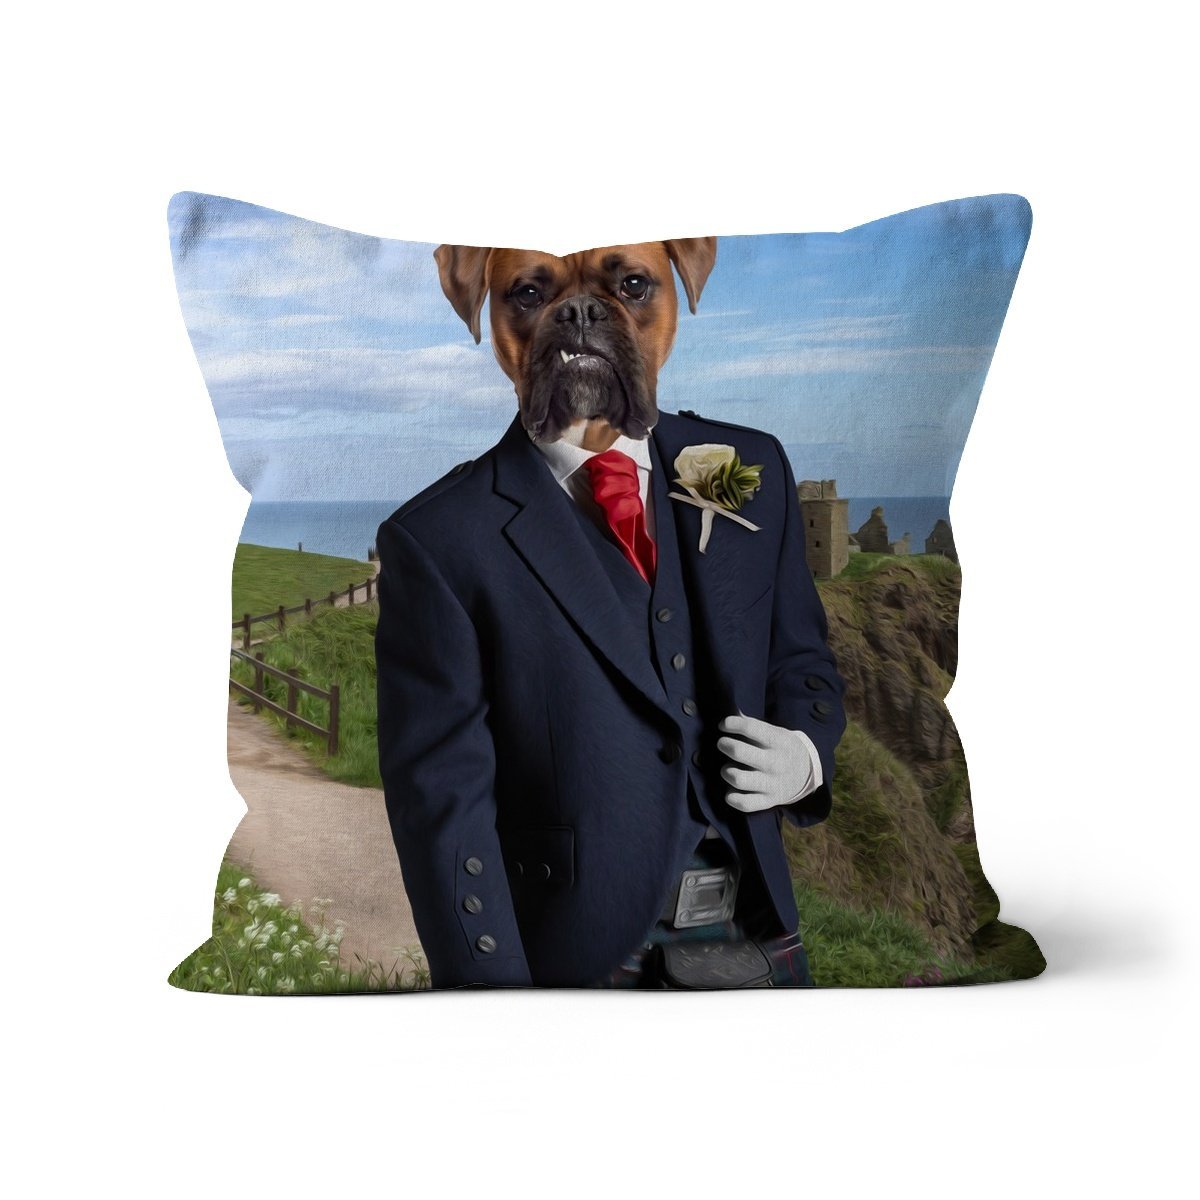 The Scottish Gent: Custom Pet Cushion - Paw & Glory - #pet portraits# - #dog portraits# - #pet portraits uk#paw and glory, custom pet portrait cushion,personalised dog pillows, dog photo on pillow, pillow with dogs face, dog pillow cases, pillow custom, pet custom pillow